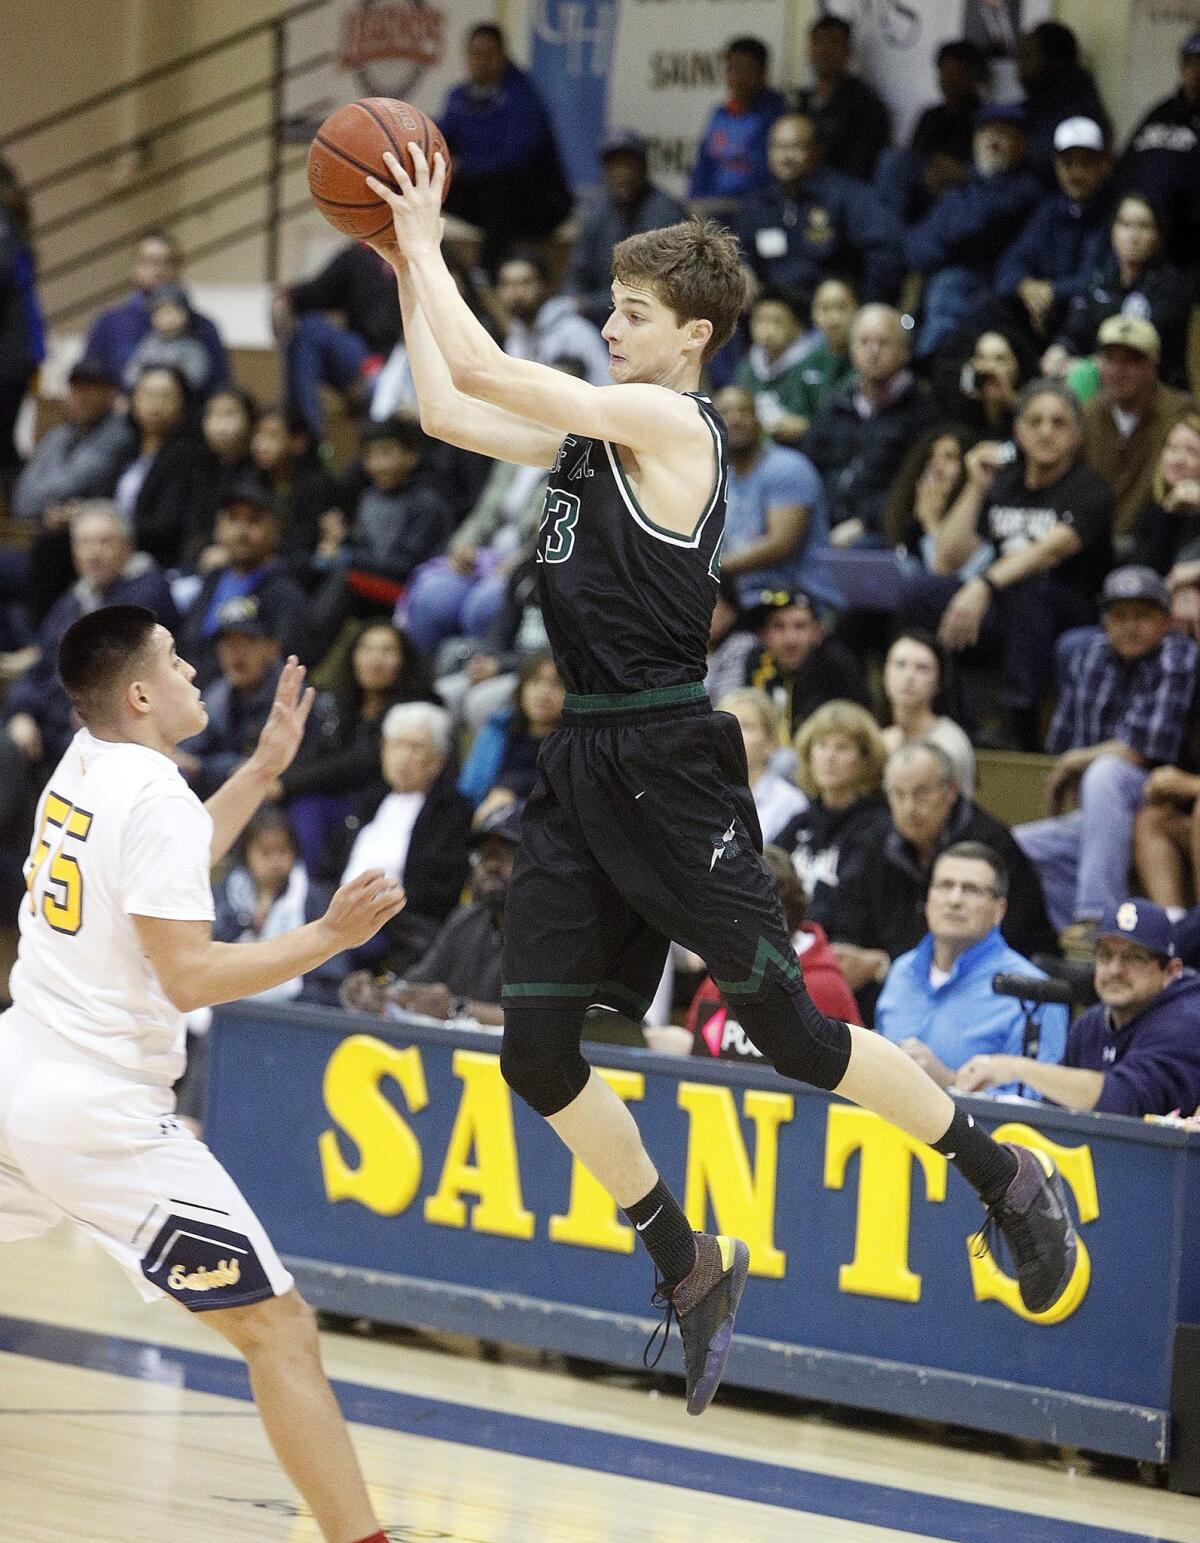 Sage Hill School's Jack Strohman jumps to catch a pass while bringing the ball up court in the quarterfinals of the CIF State Southern California Regional Division V playoffs at Santa Clara on Thursday.